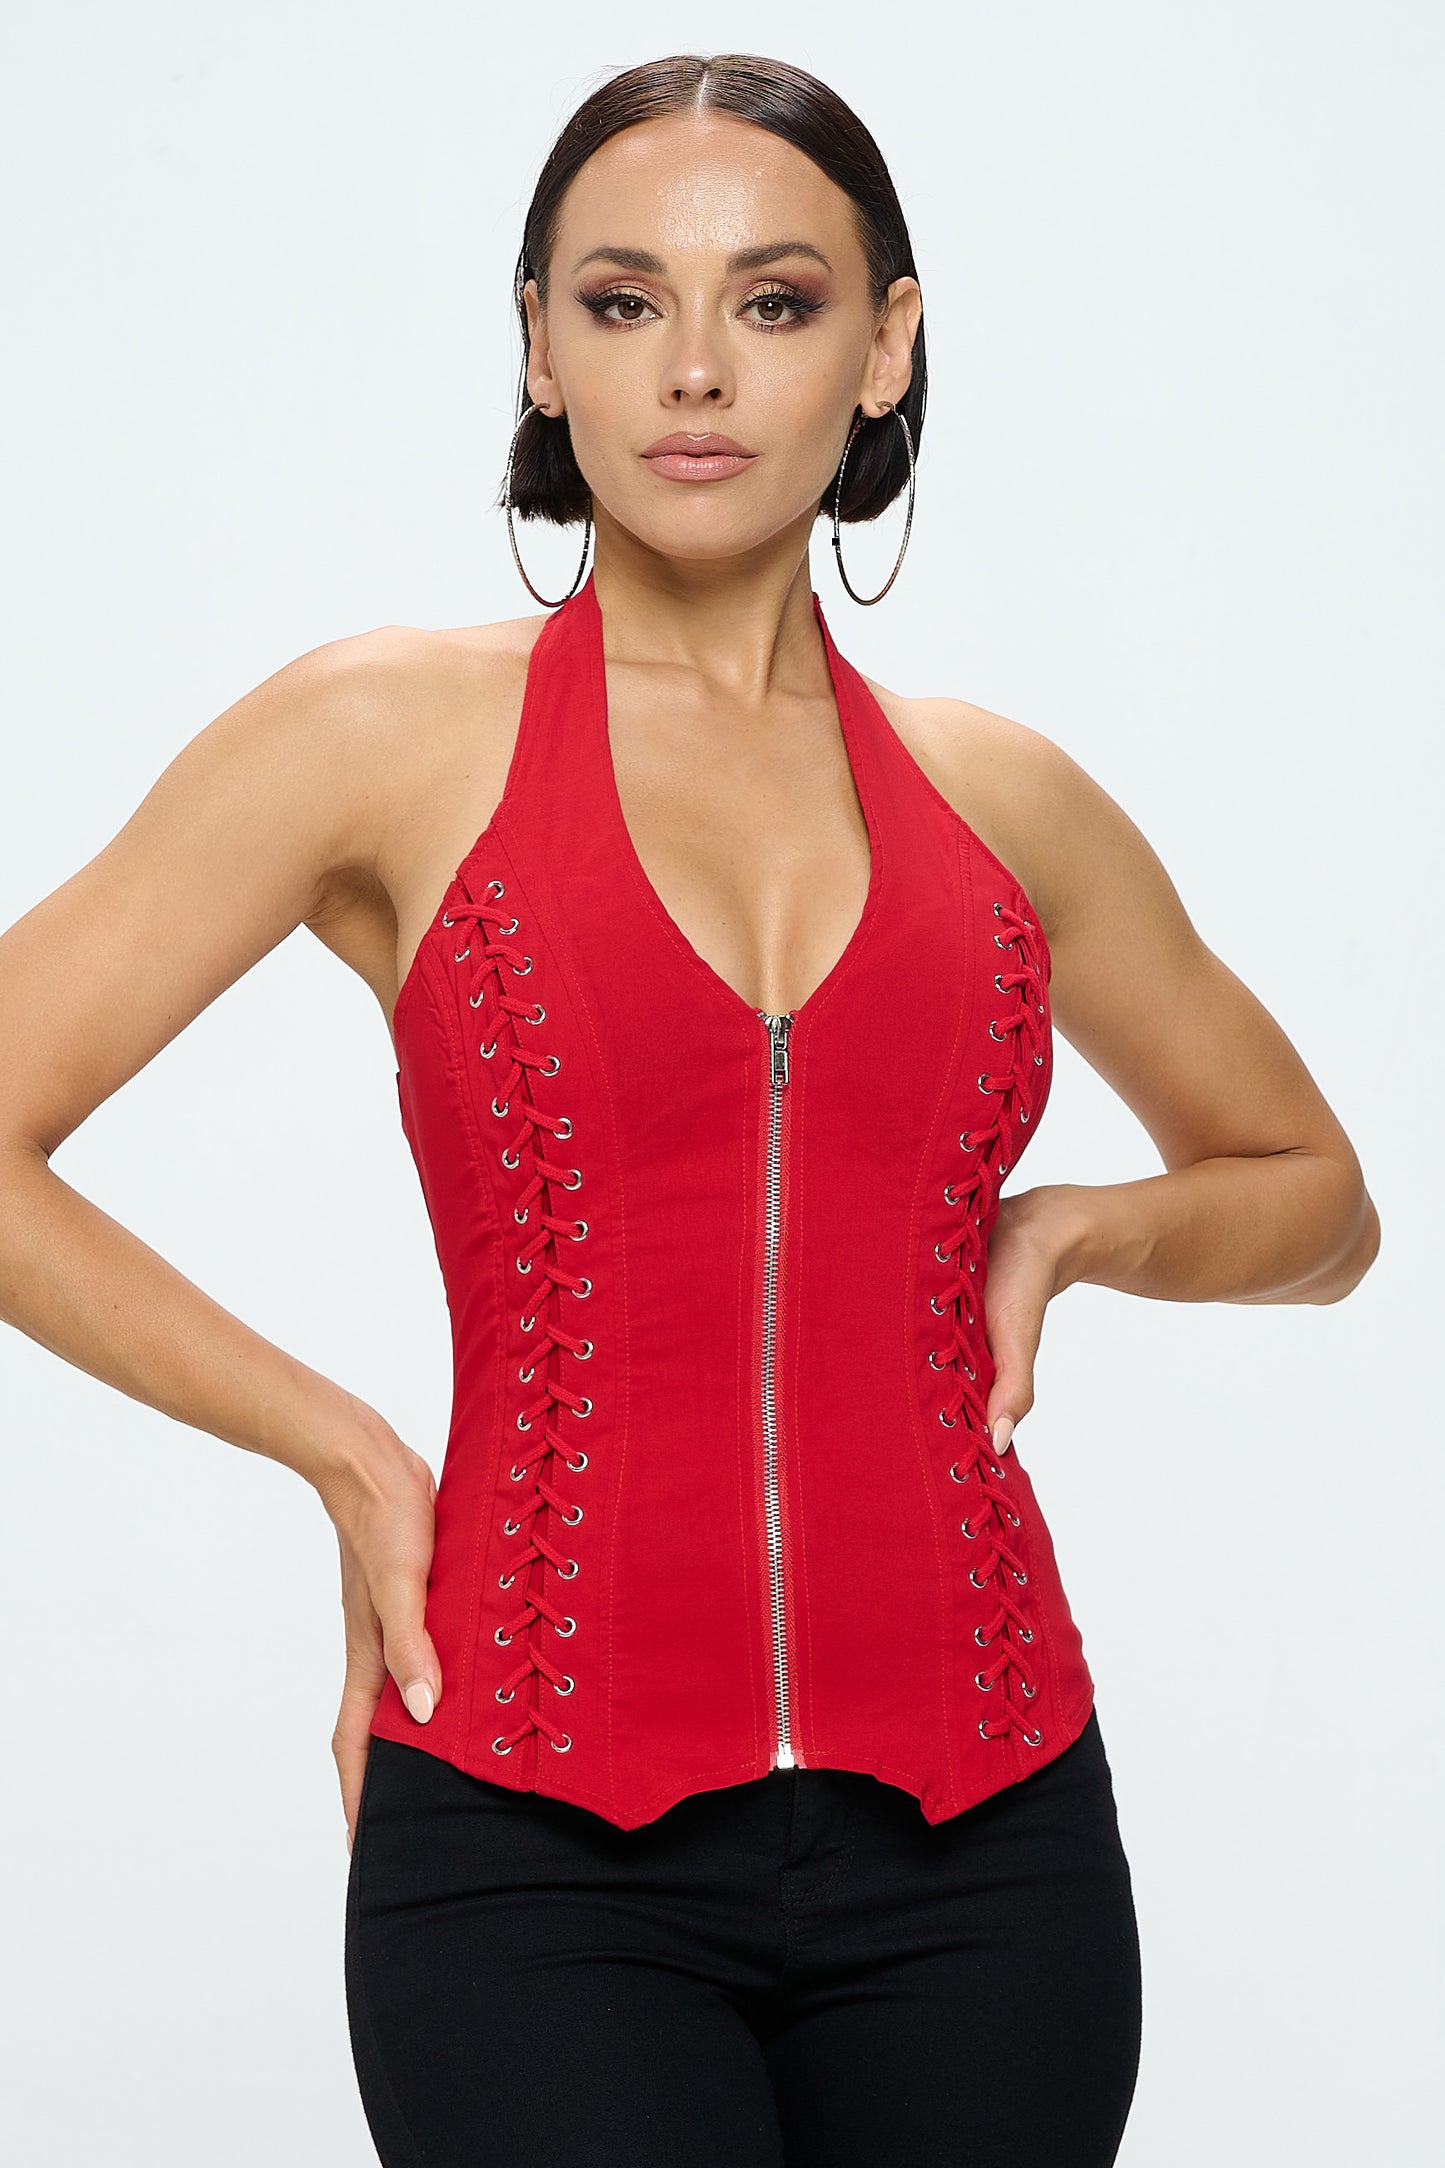 LACE UP DETAIL ZIP UP FRONT CLOSURE HALTER TOP